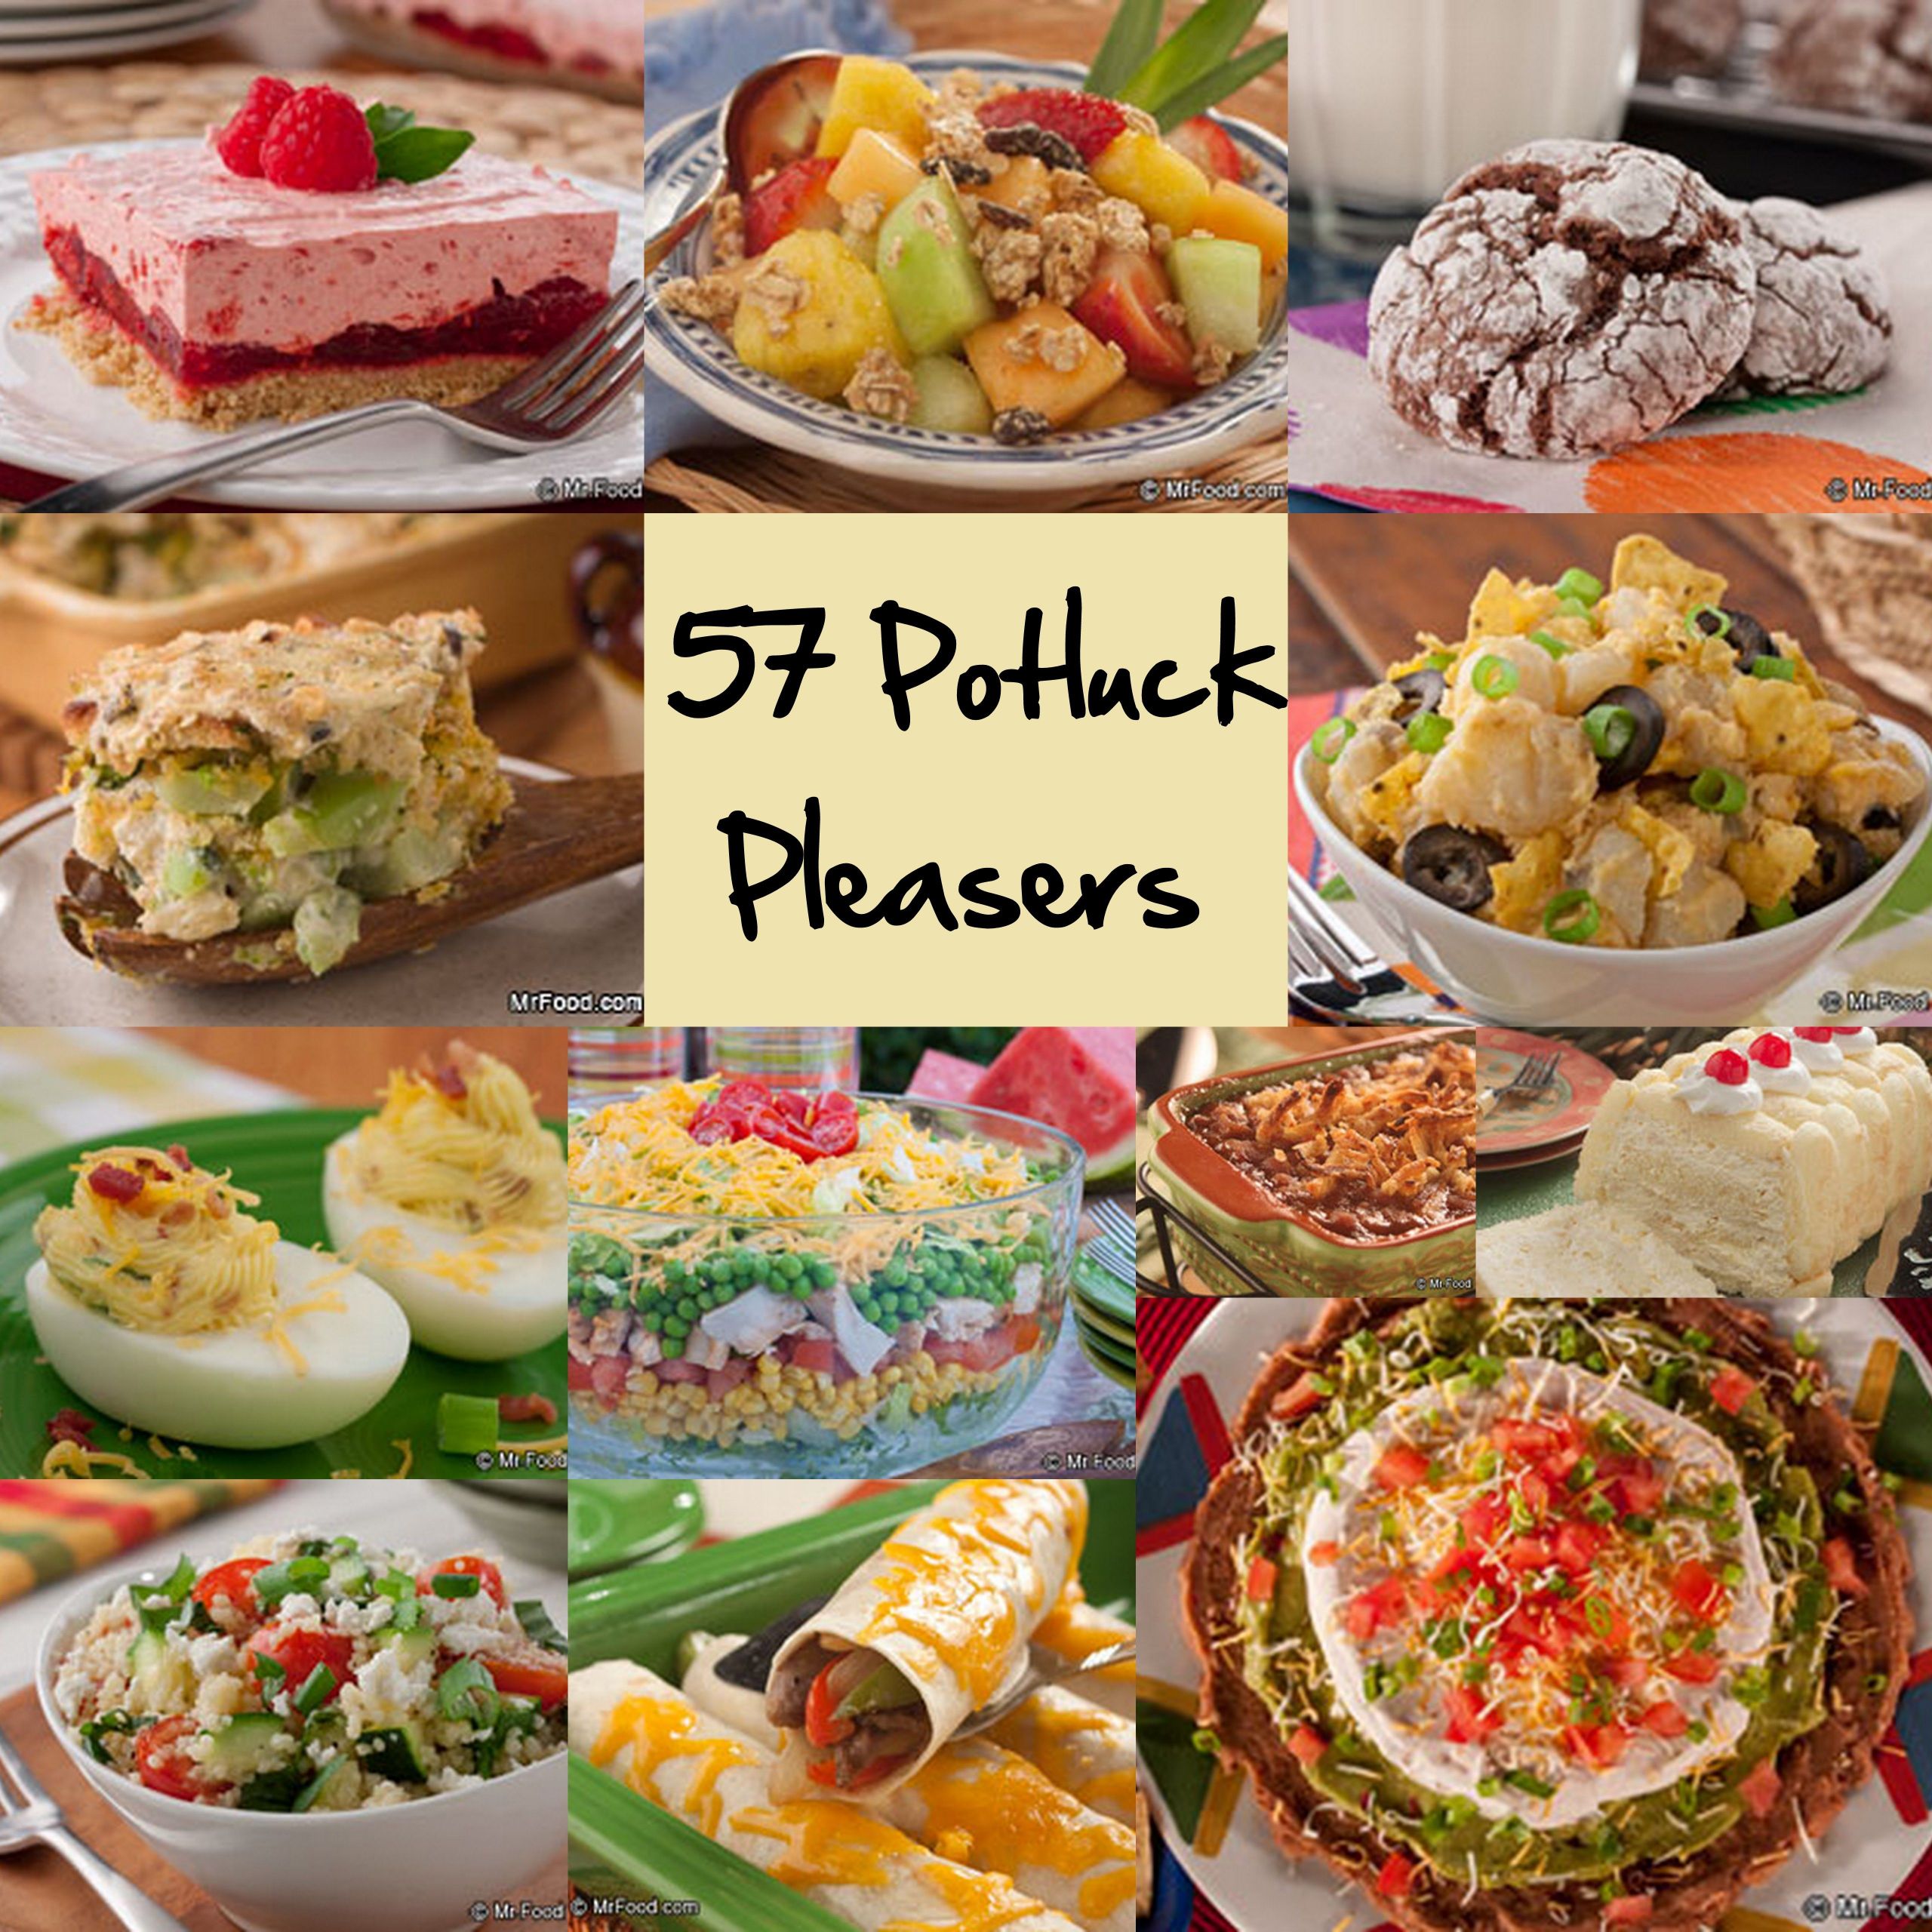 Christmas Office Party Food Ideas
 The next time you need that perfect potluck dish for a